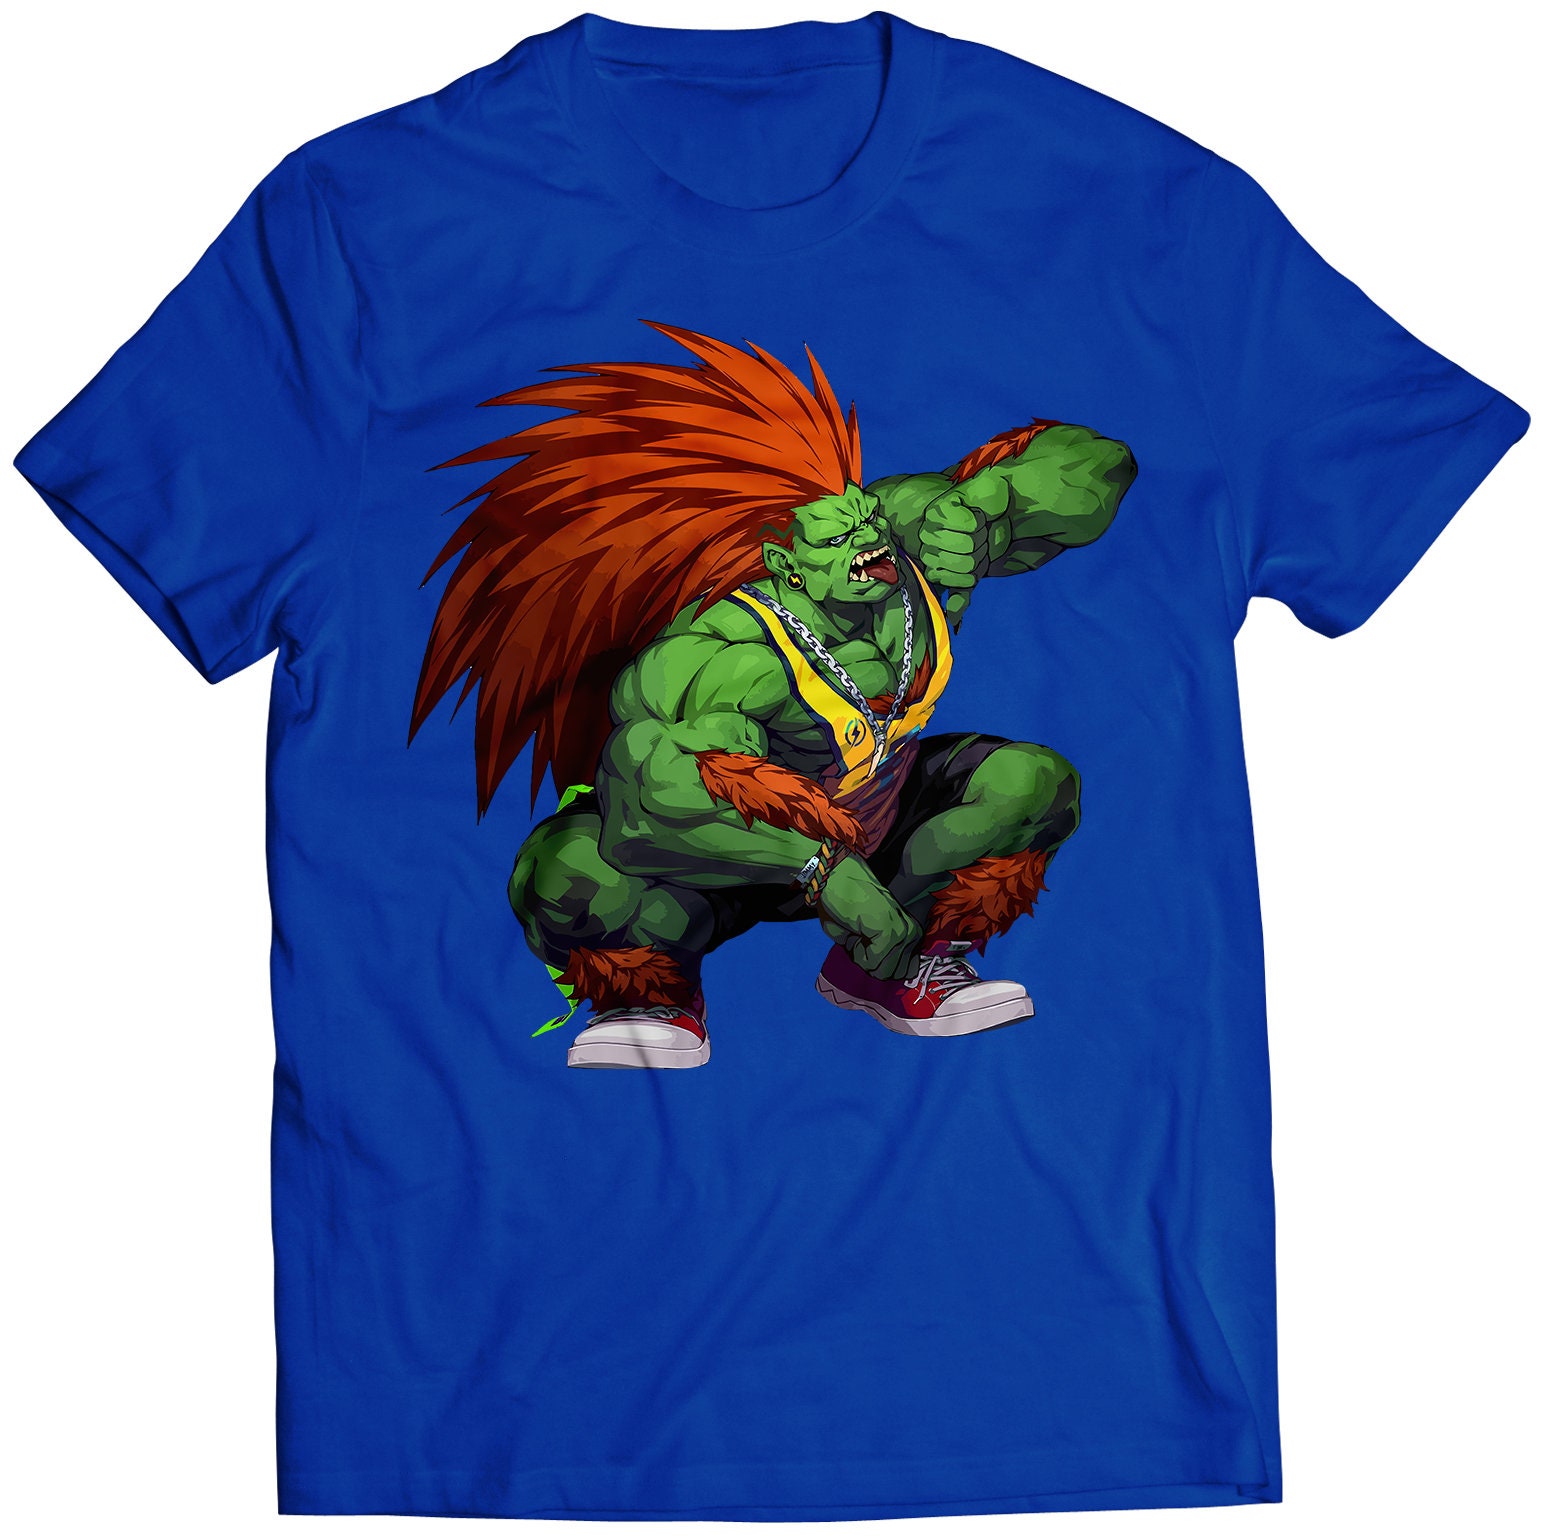 Who should I link Blanka to? : r/streetfighterduel